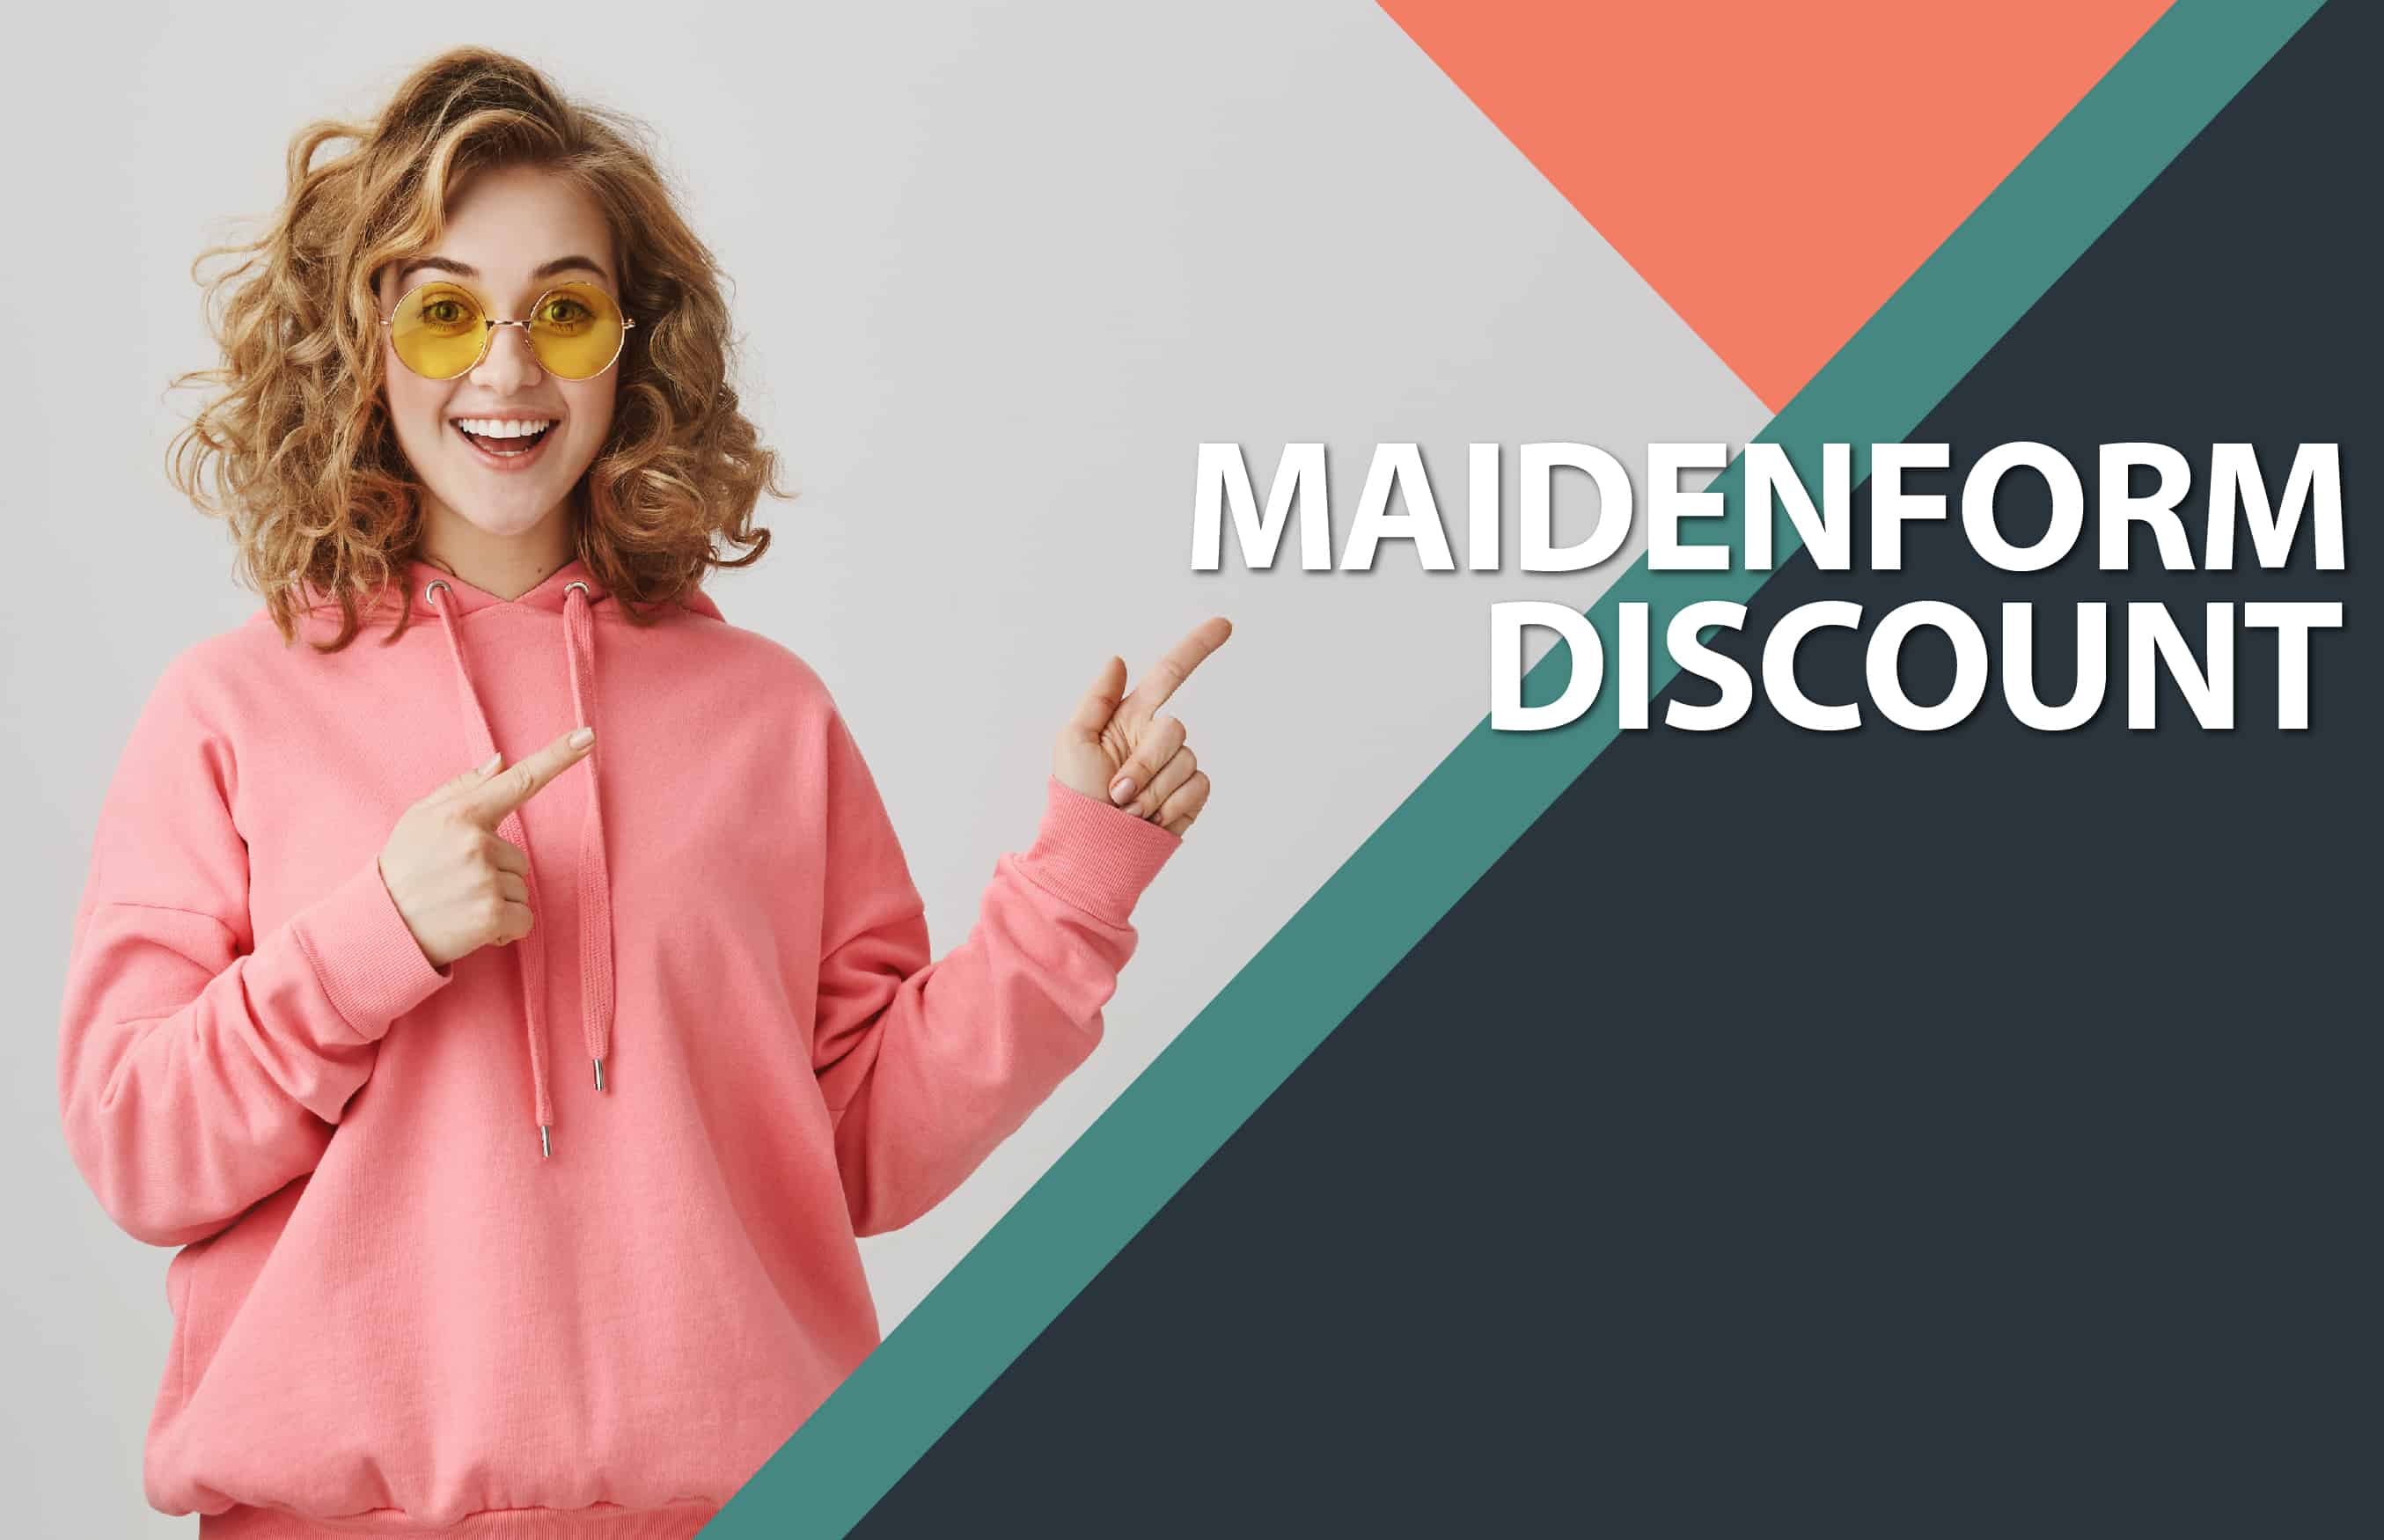 Irresistible Offer: Maidenform - 20% Off Everything + Free Shipping, No Code Required!